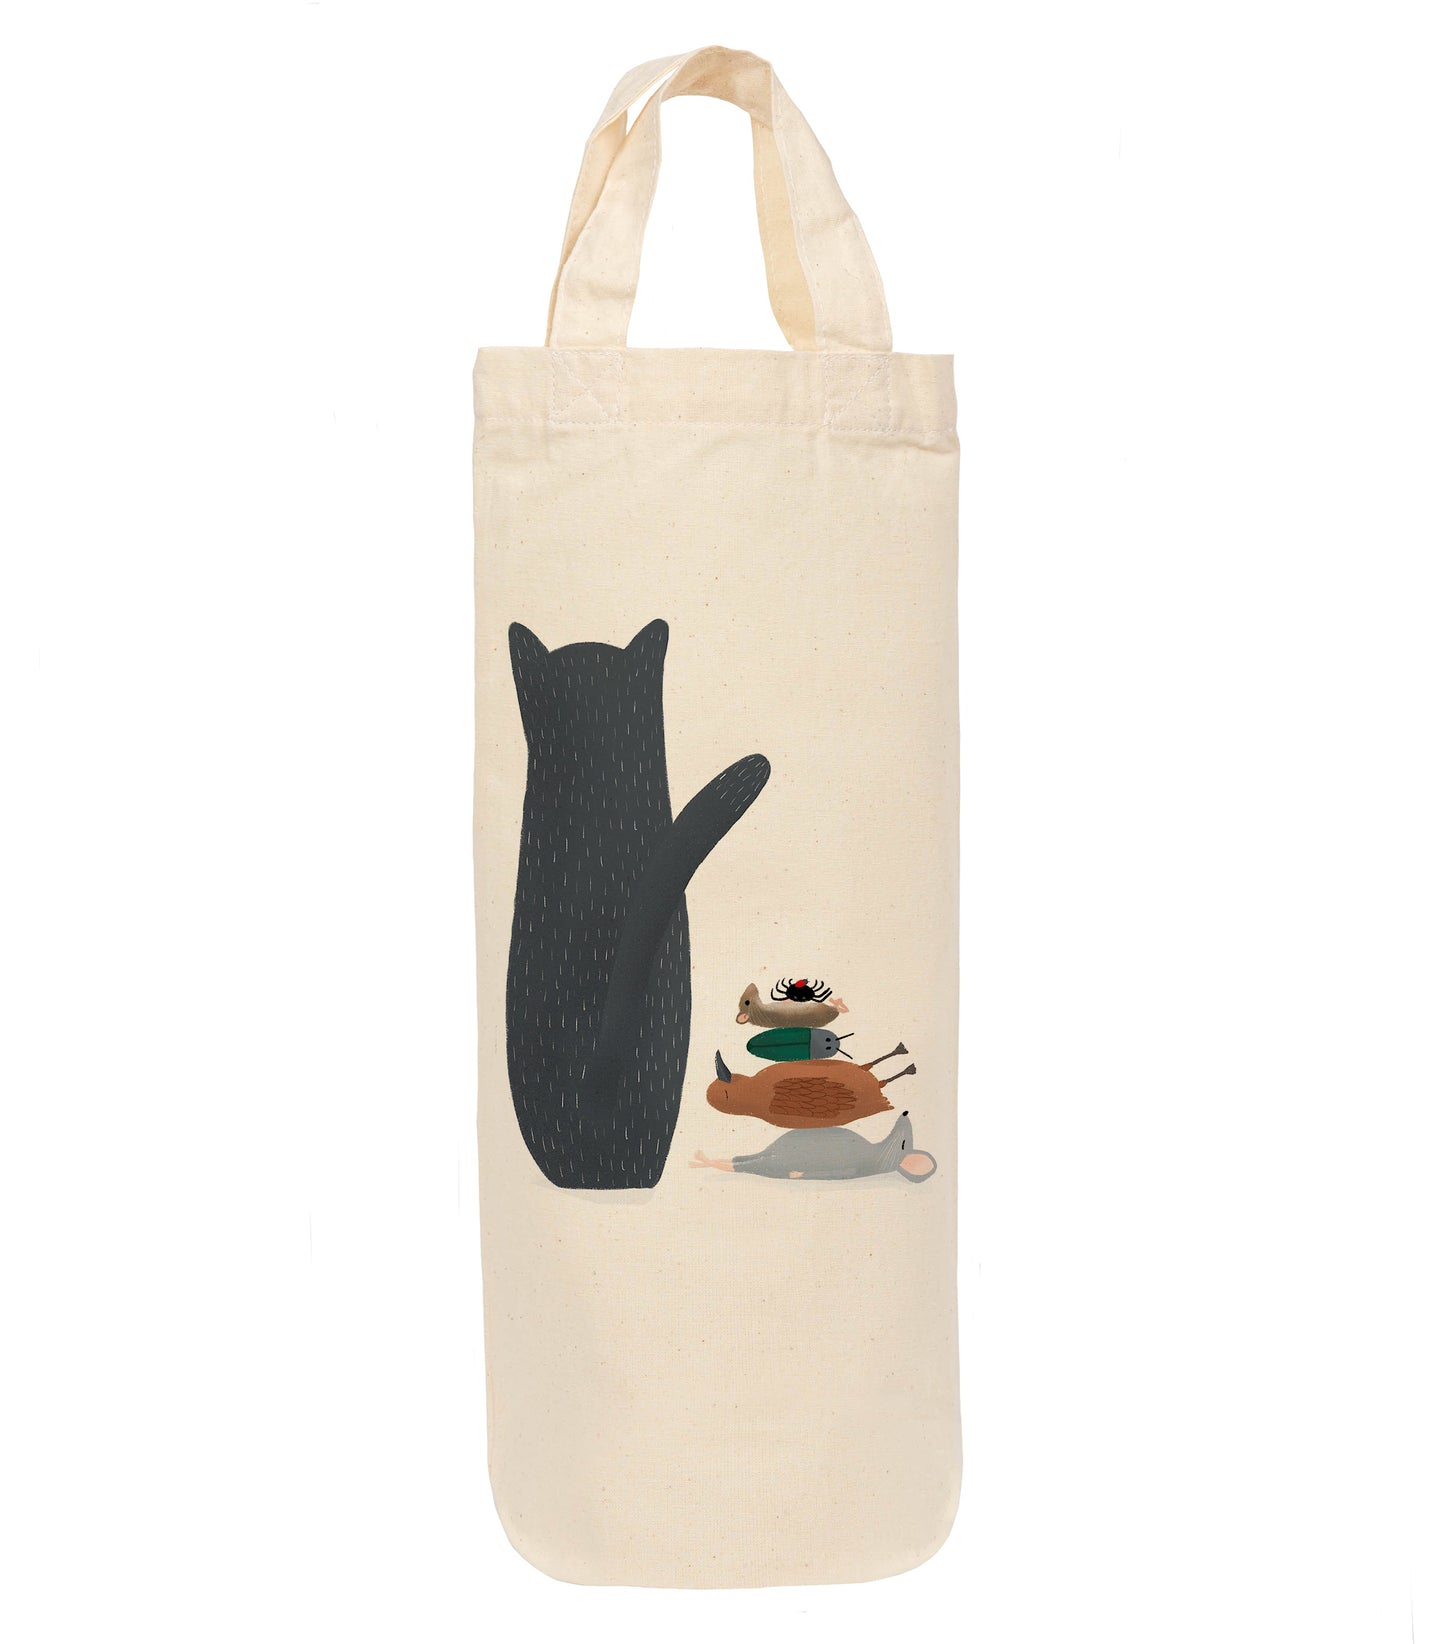 Cats lunch bottle bag - wine tote - gift bag